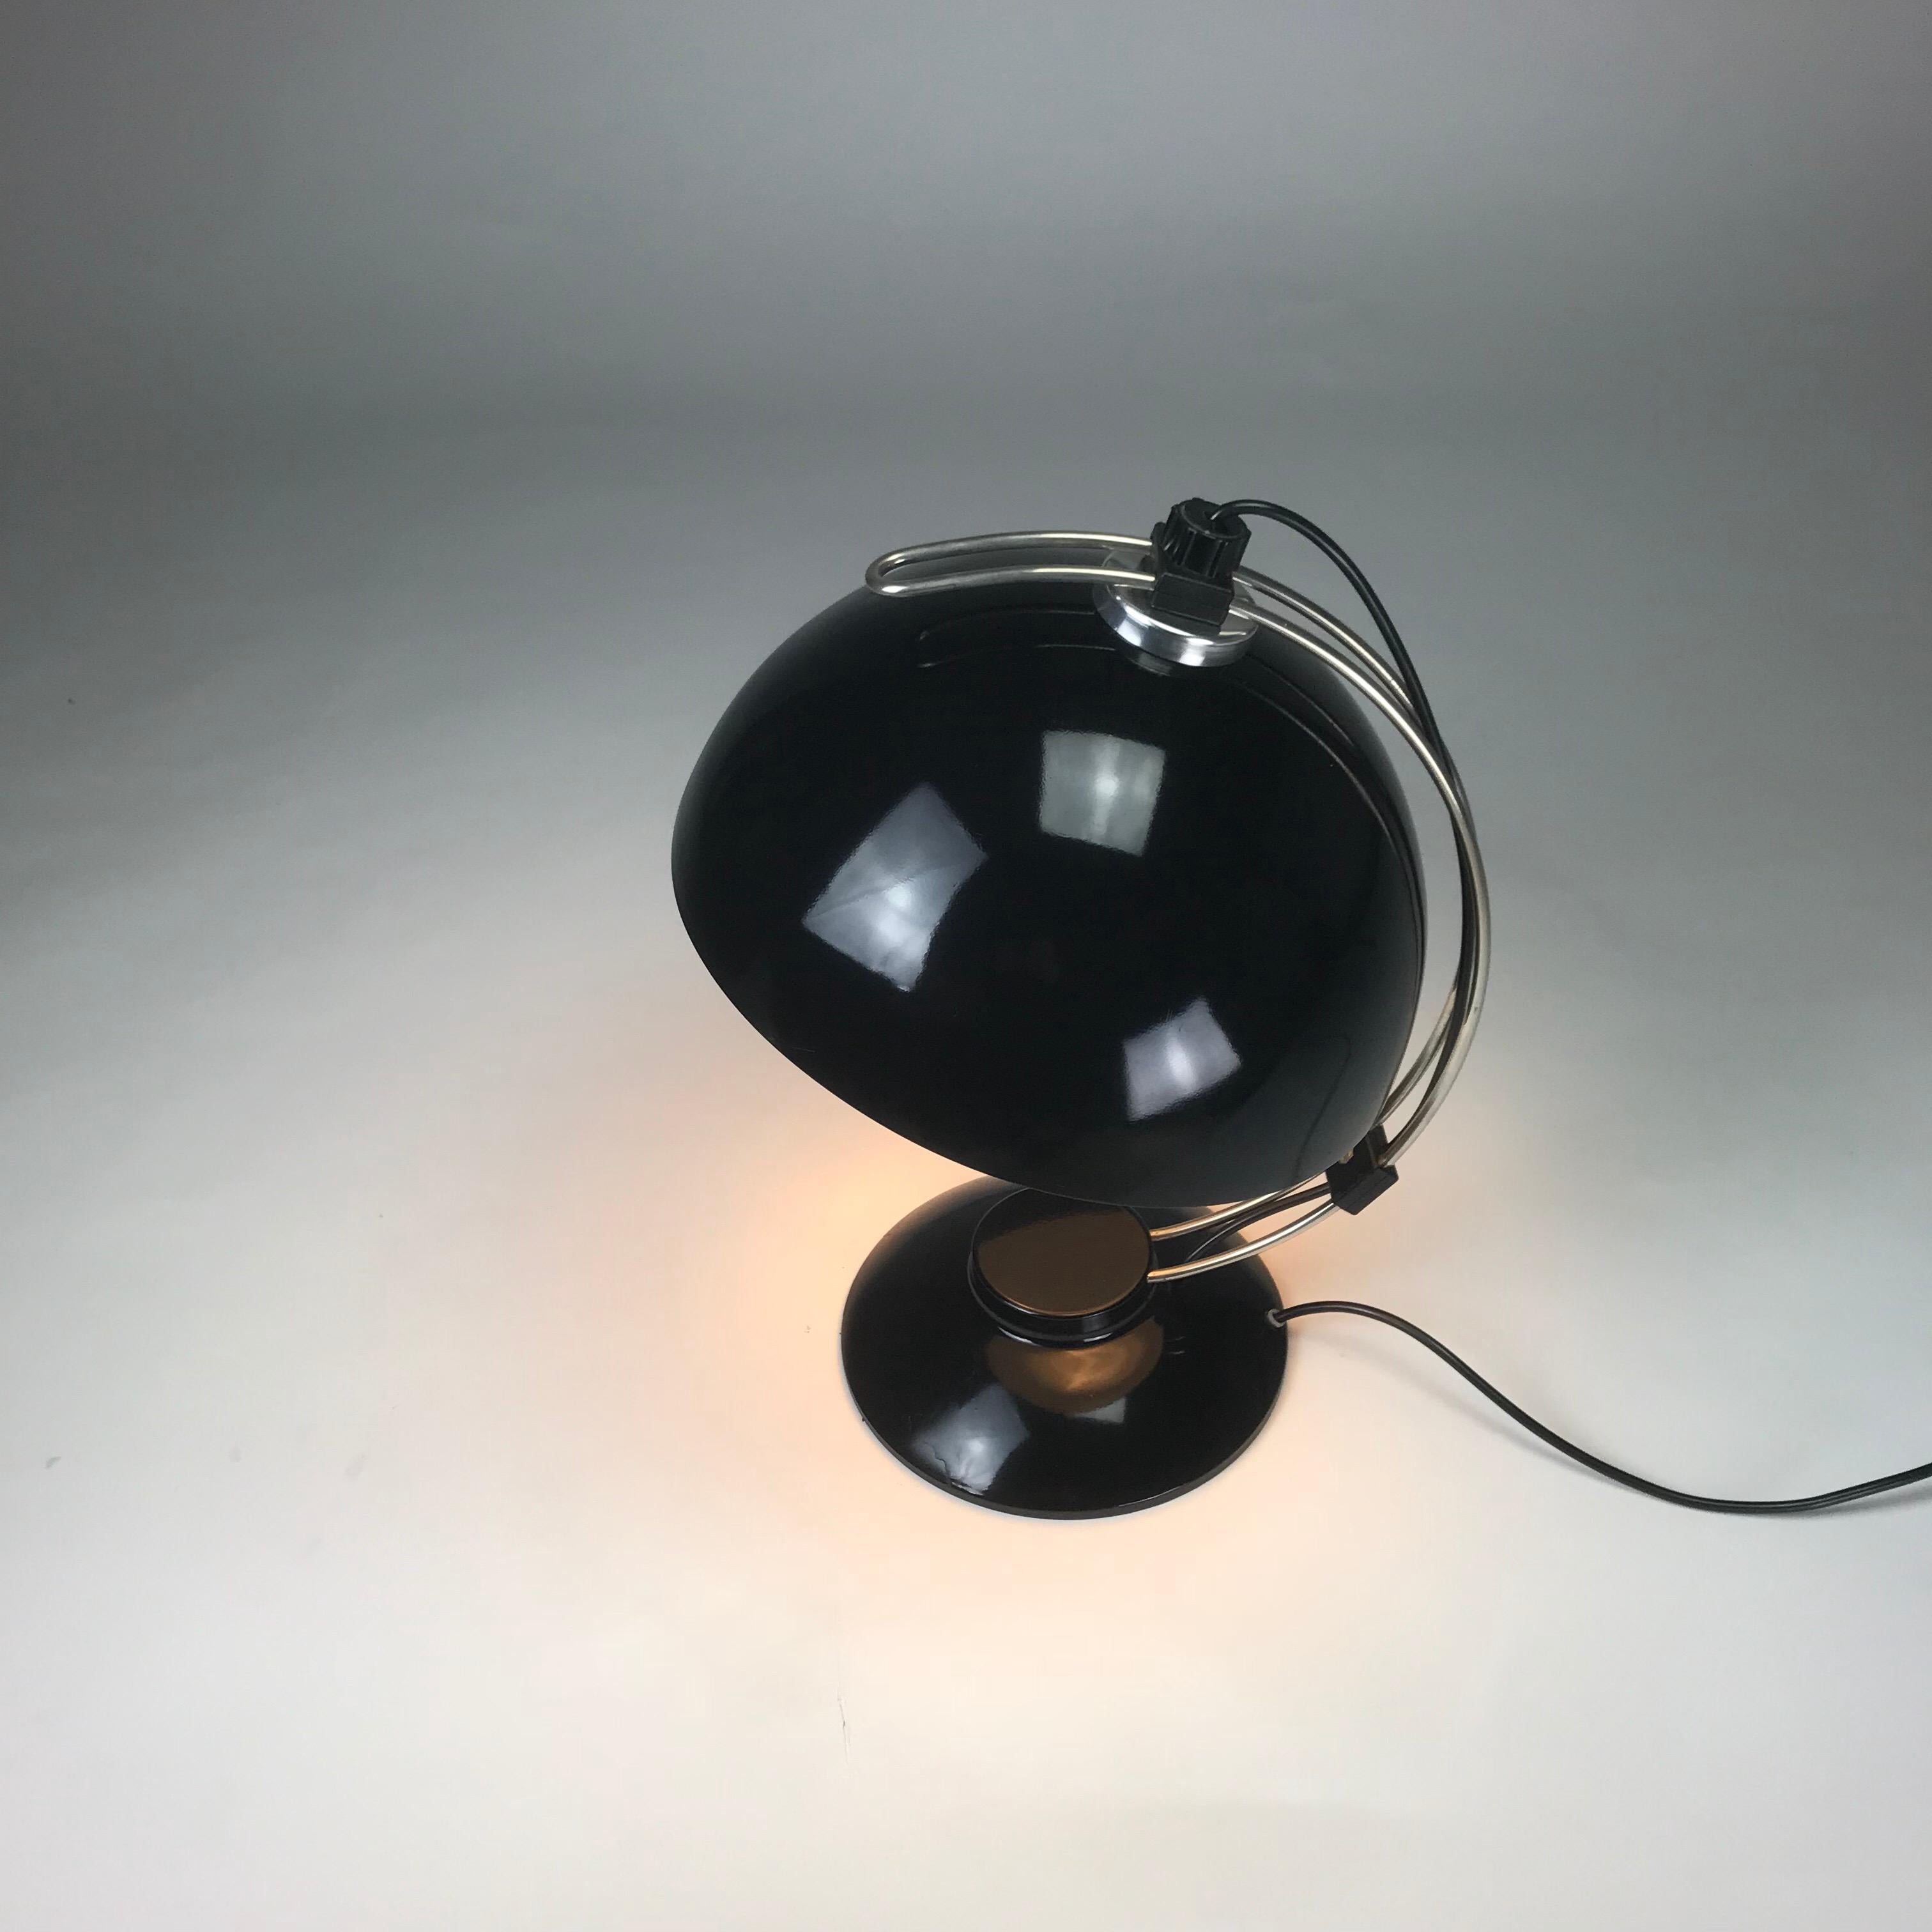 Metal Black Glossy Industrial Desk Lamp from the 1950s